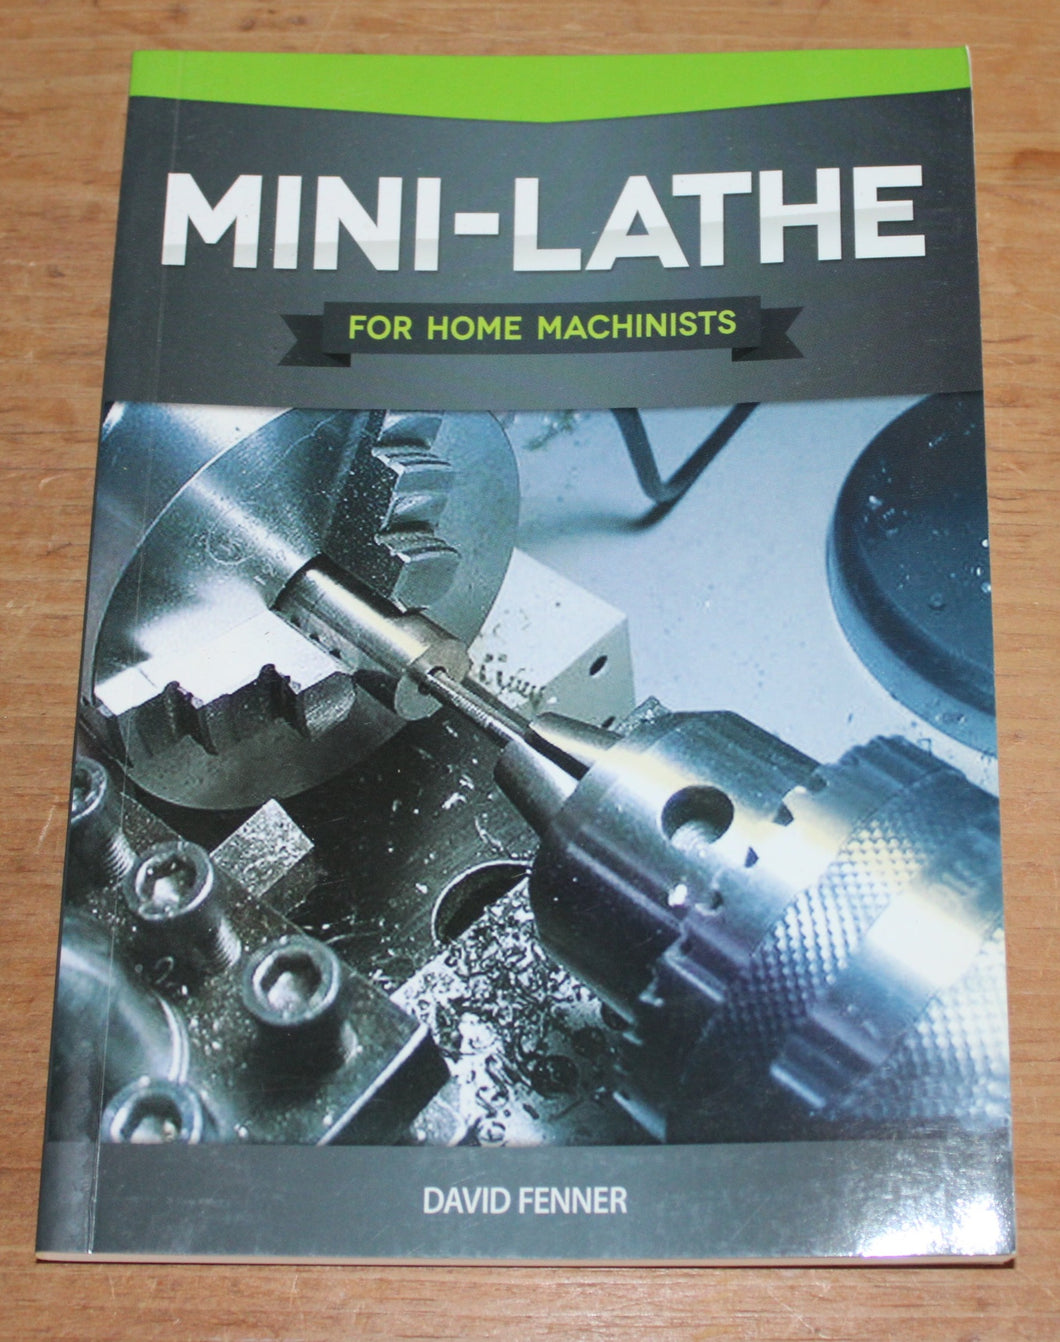 Mini-Lathe for Home Machinists – David Fenner